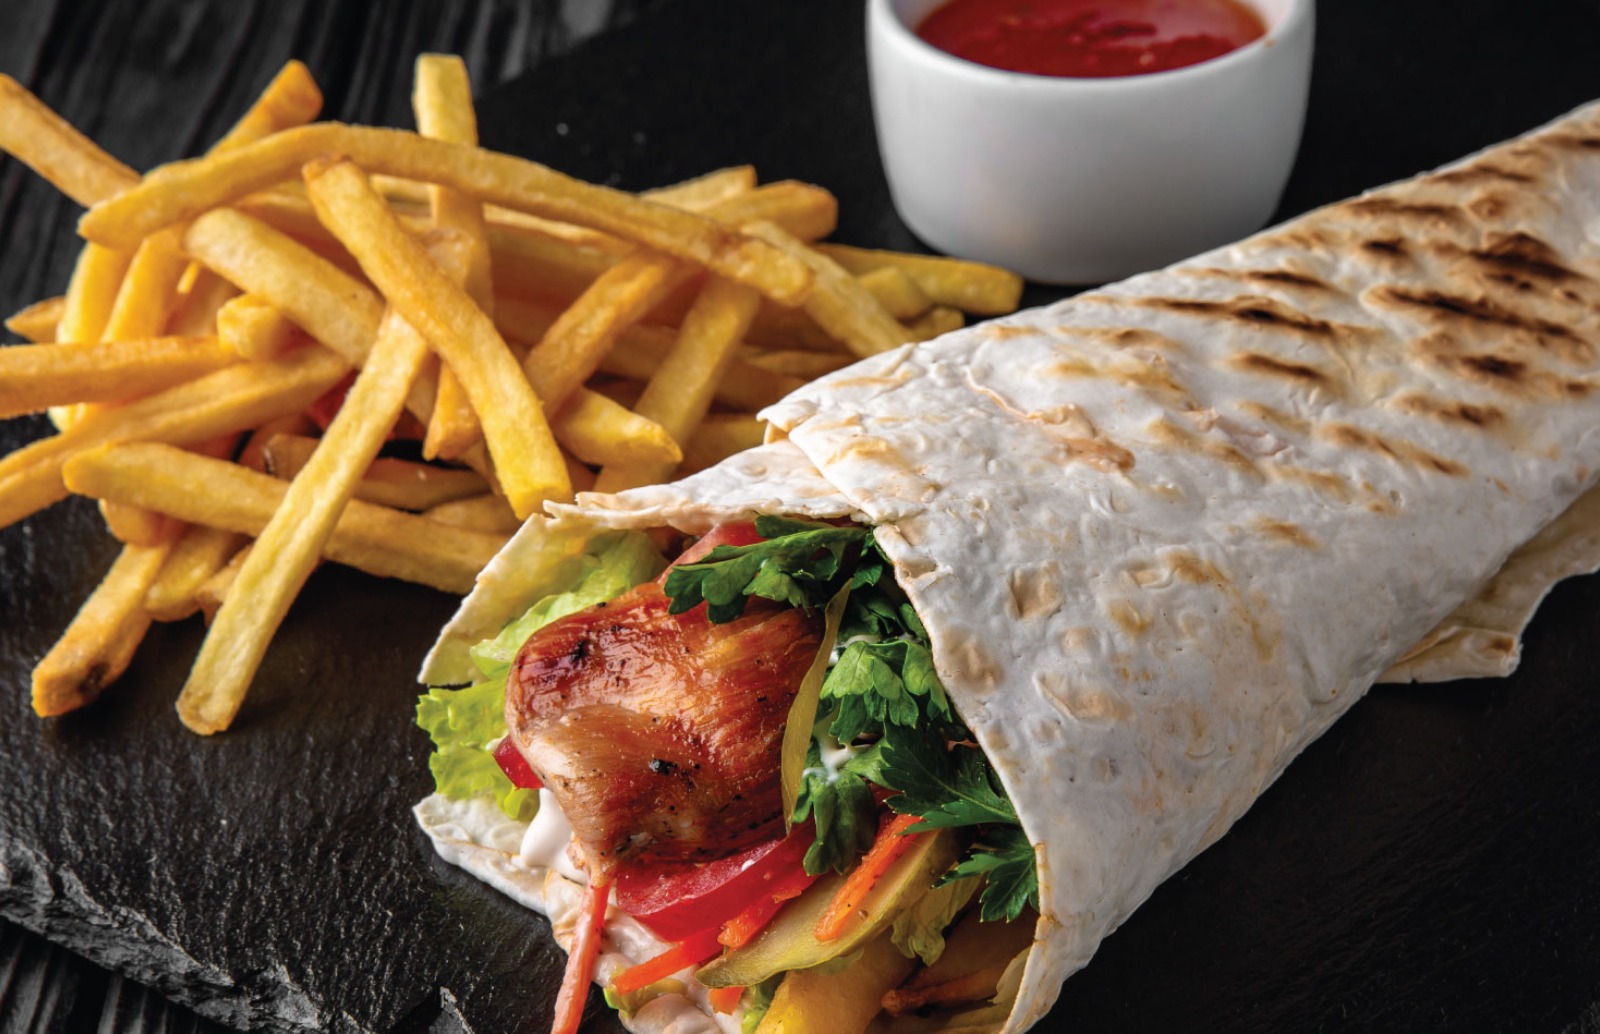 Slate with a grilled chicken wrap filled with salad and mayo, portion of fries on the side with a tomato sauce for dipping